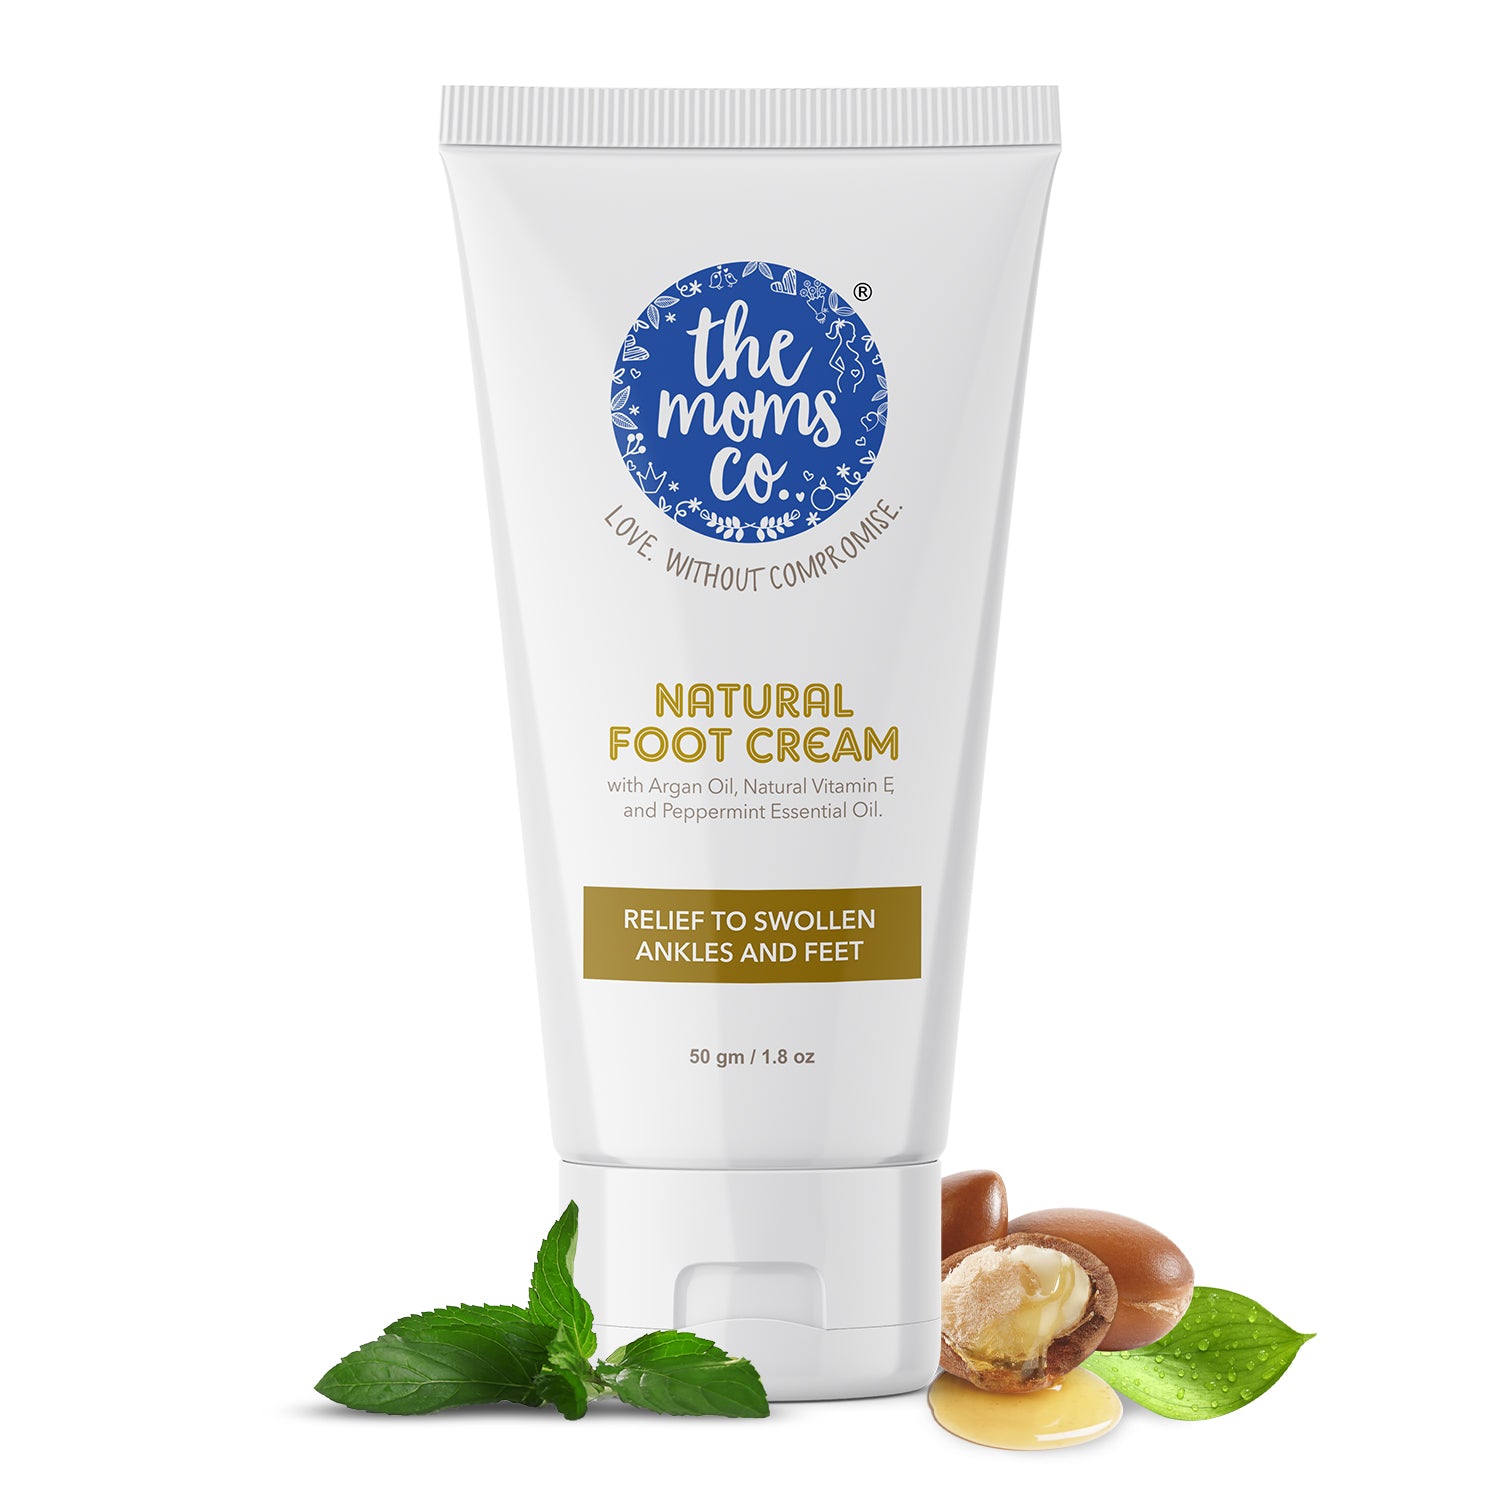 The Moms Co. Natural Foot Cream With Argon oil, Vit E & Peppermint Essential Oil Relief for Swollen Ankles and Feet- 50 g